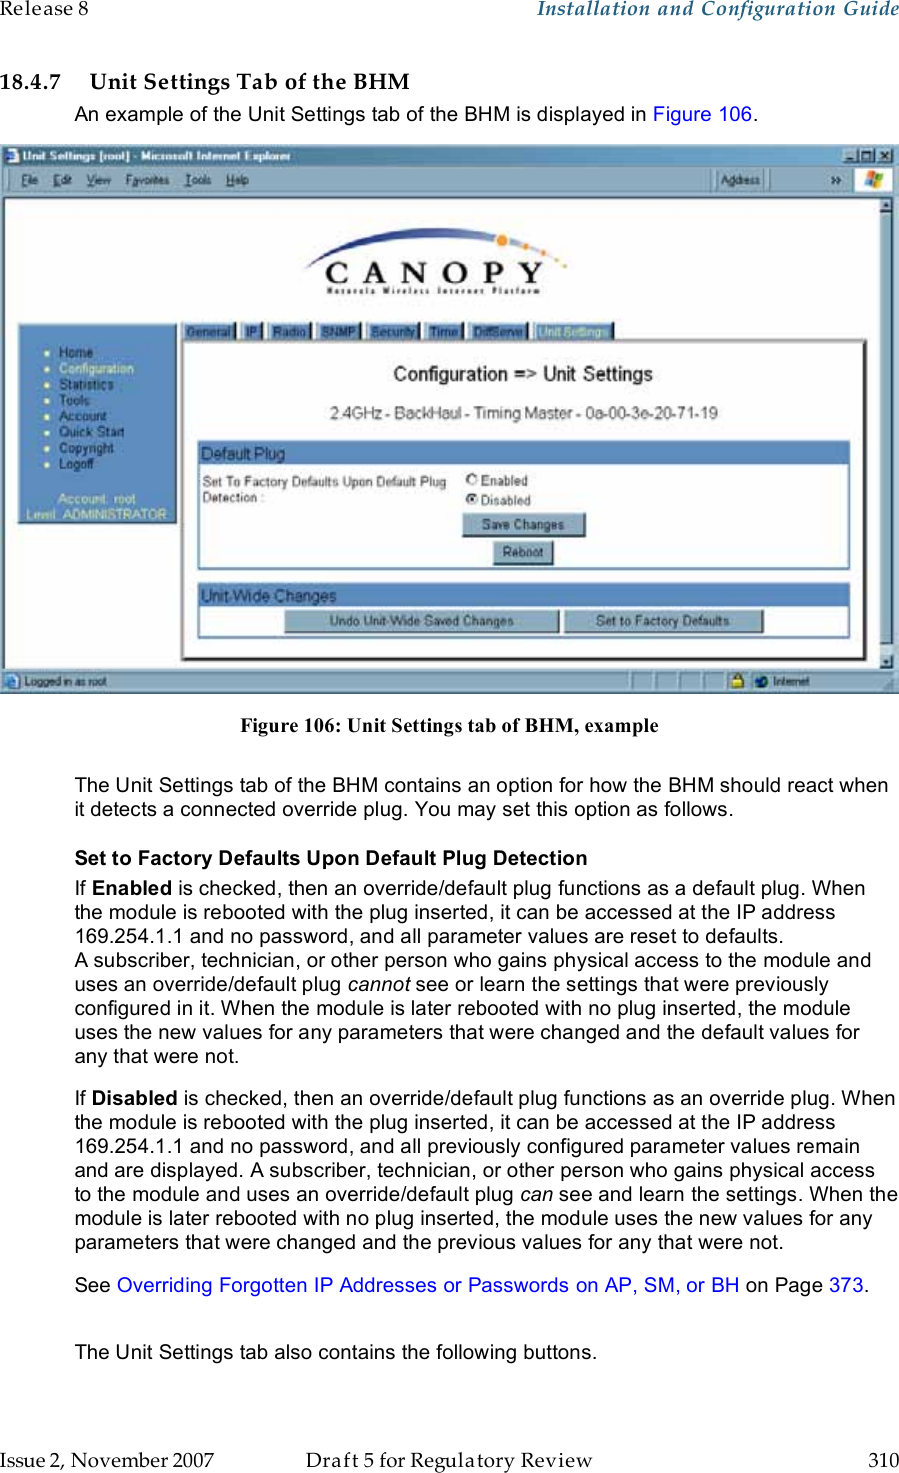 Release 8    Installation and Configuration Guide   Issue 2, November 2007  Draft 5 for Regulatory Review  310     18.4.7 Unit Settings Tab of the BHM An example of the Unit Settings tab of the BHM is displayed in Figure 106.  Figure 106: Unit Settings tab of BHM, example  The Unit Settings tab of the BHM contains an option for how the BHM should react when it detects a connected override plug. You may set this option as follows. Set to Factory Defaults Upon Default Plug Detection If Enabled is checked, then an override/default plug functions as a default plug. When the module is rebooted with the plug inserted, it can be accessed at the IP address 169.254.1.1 and no password, and all parameter values are reset to defaults. A subscriber, technician, or other person who gains physical access to the module and uses an override/default plug cannot see or learn the settings that were previously configured in it. When the module is later rebooted with no plug inserted, the module uses the new values for any parameters that were changed and the default values for any that were not. If Disabled is checked, then an override/default plug functions as an override plug. When the module is rebooted with the plug inserted, it can be accessed at the IP address 169.254.1.1 and no password, and all previously configured parameter values remain and are displayed. A subscriber, technician, or other person who gains physical access to the module and uses an override/default plug can see and learn the settings. When the module is later rebooted with no plug inserted, the module uses the new values for any parameters that were changed and the previous values for any that were not. See Overriding Forgotten IP Addresses or Passwords on AP, SM, or BH on Page 373.  The Unit Settings tab also contains the following buttons. 